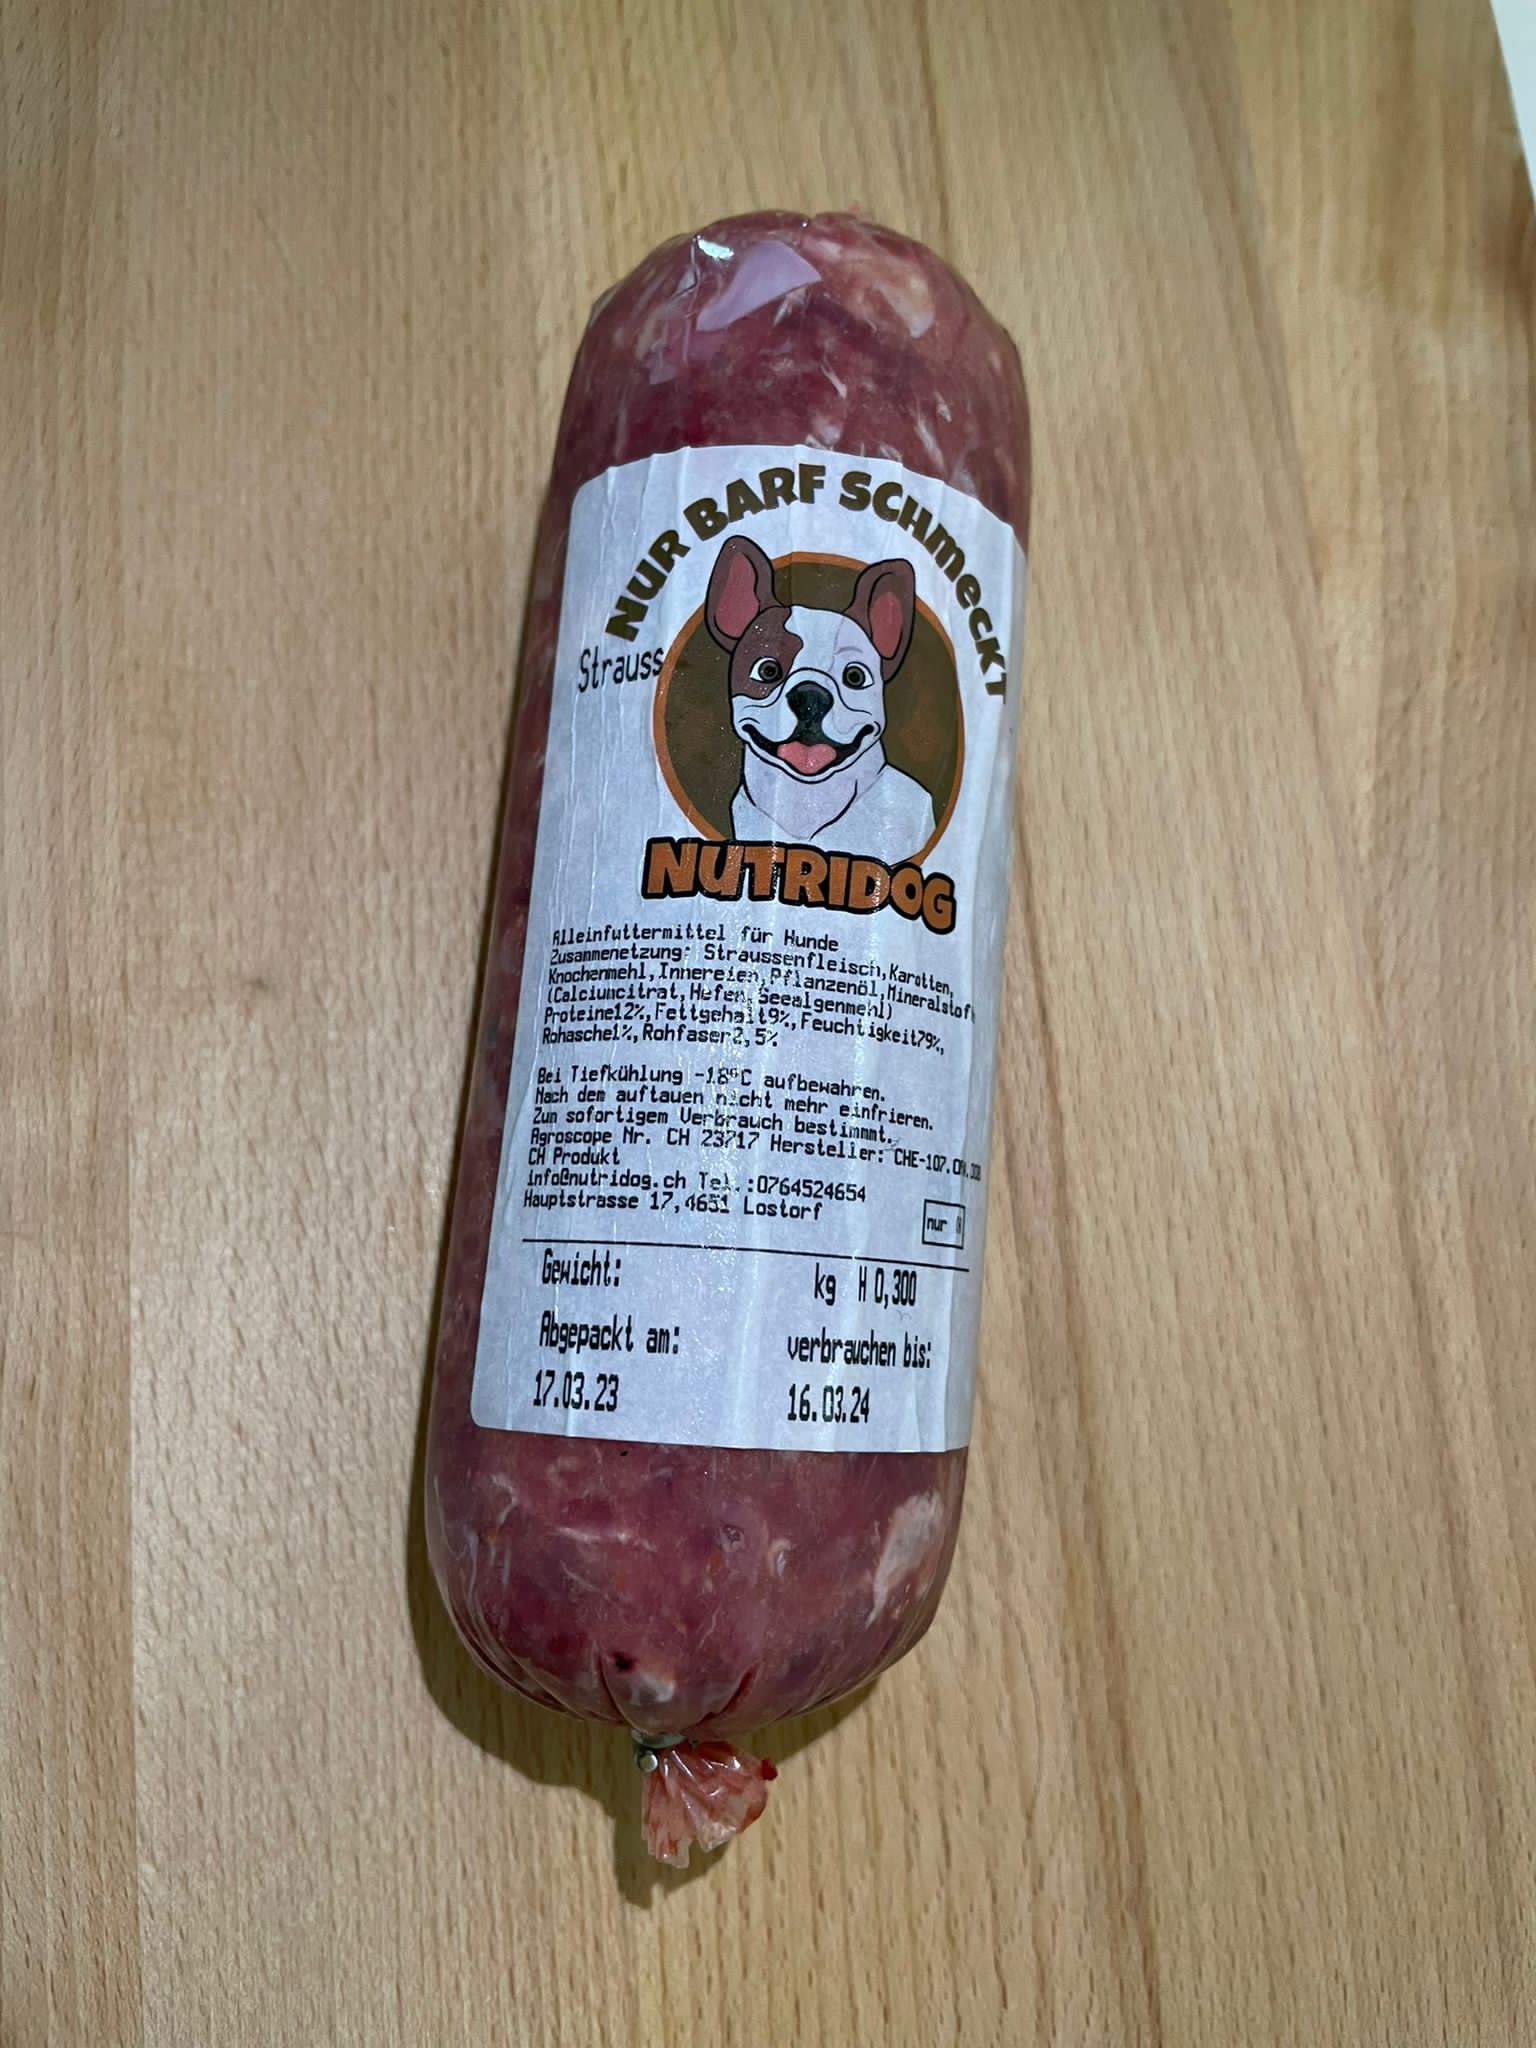 Horse Mixed "NEW" 300g per sausage only 5.90.- "Frozen".